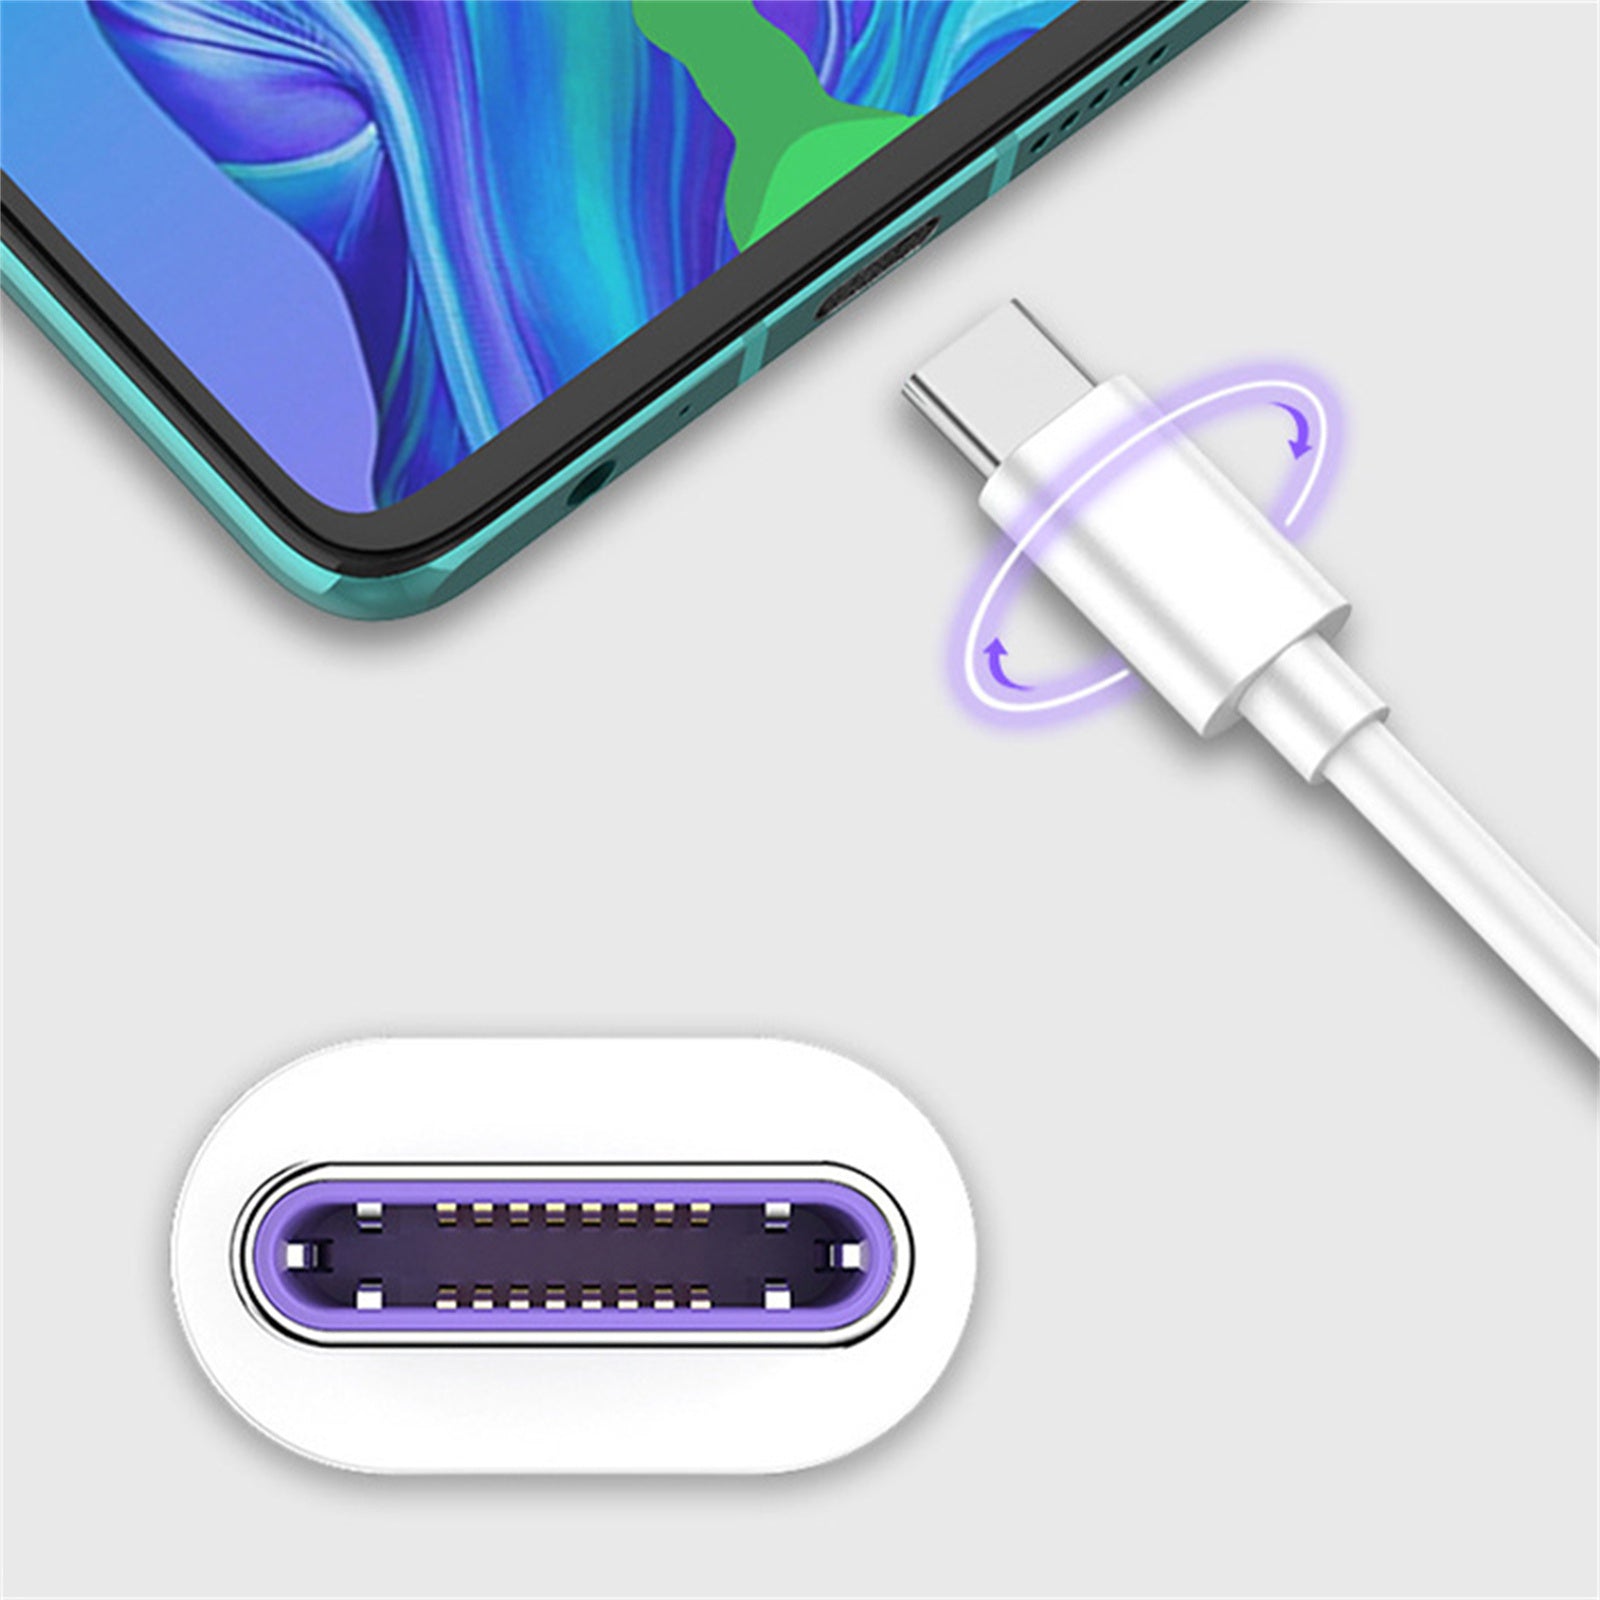 Mobax 40W USB Type-C 5X Fast Charging Cable Charger cord For Samsung S9 S8 C9 C7